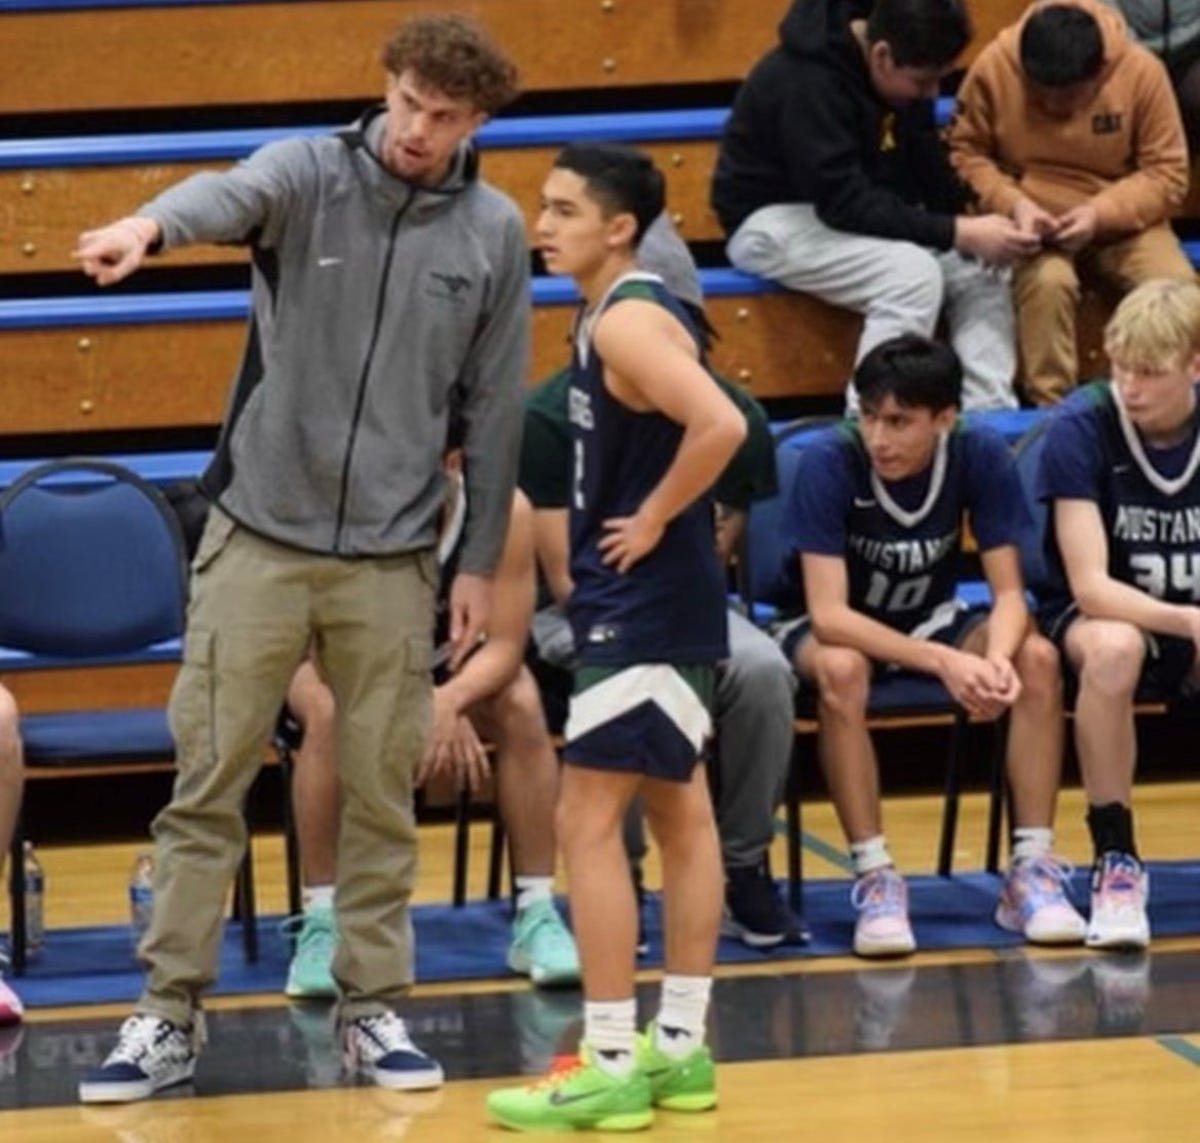 Dillon Voyles appointed boys basketball coach at Damonte Ranch, succeeding his father